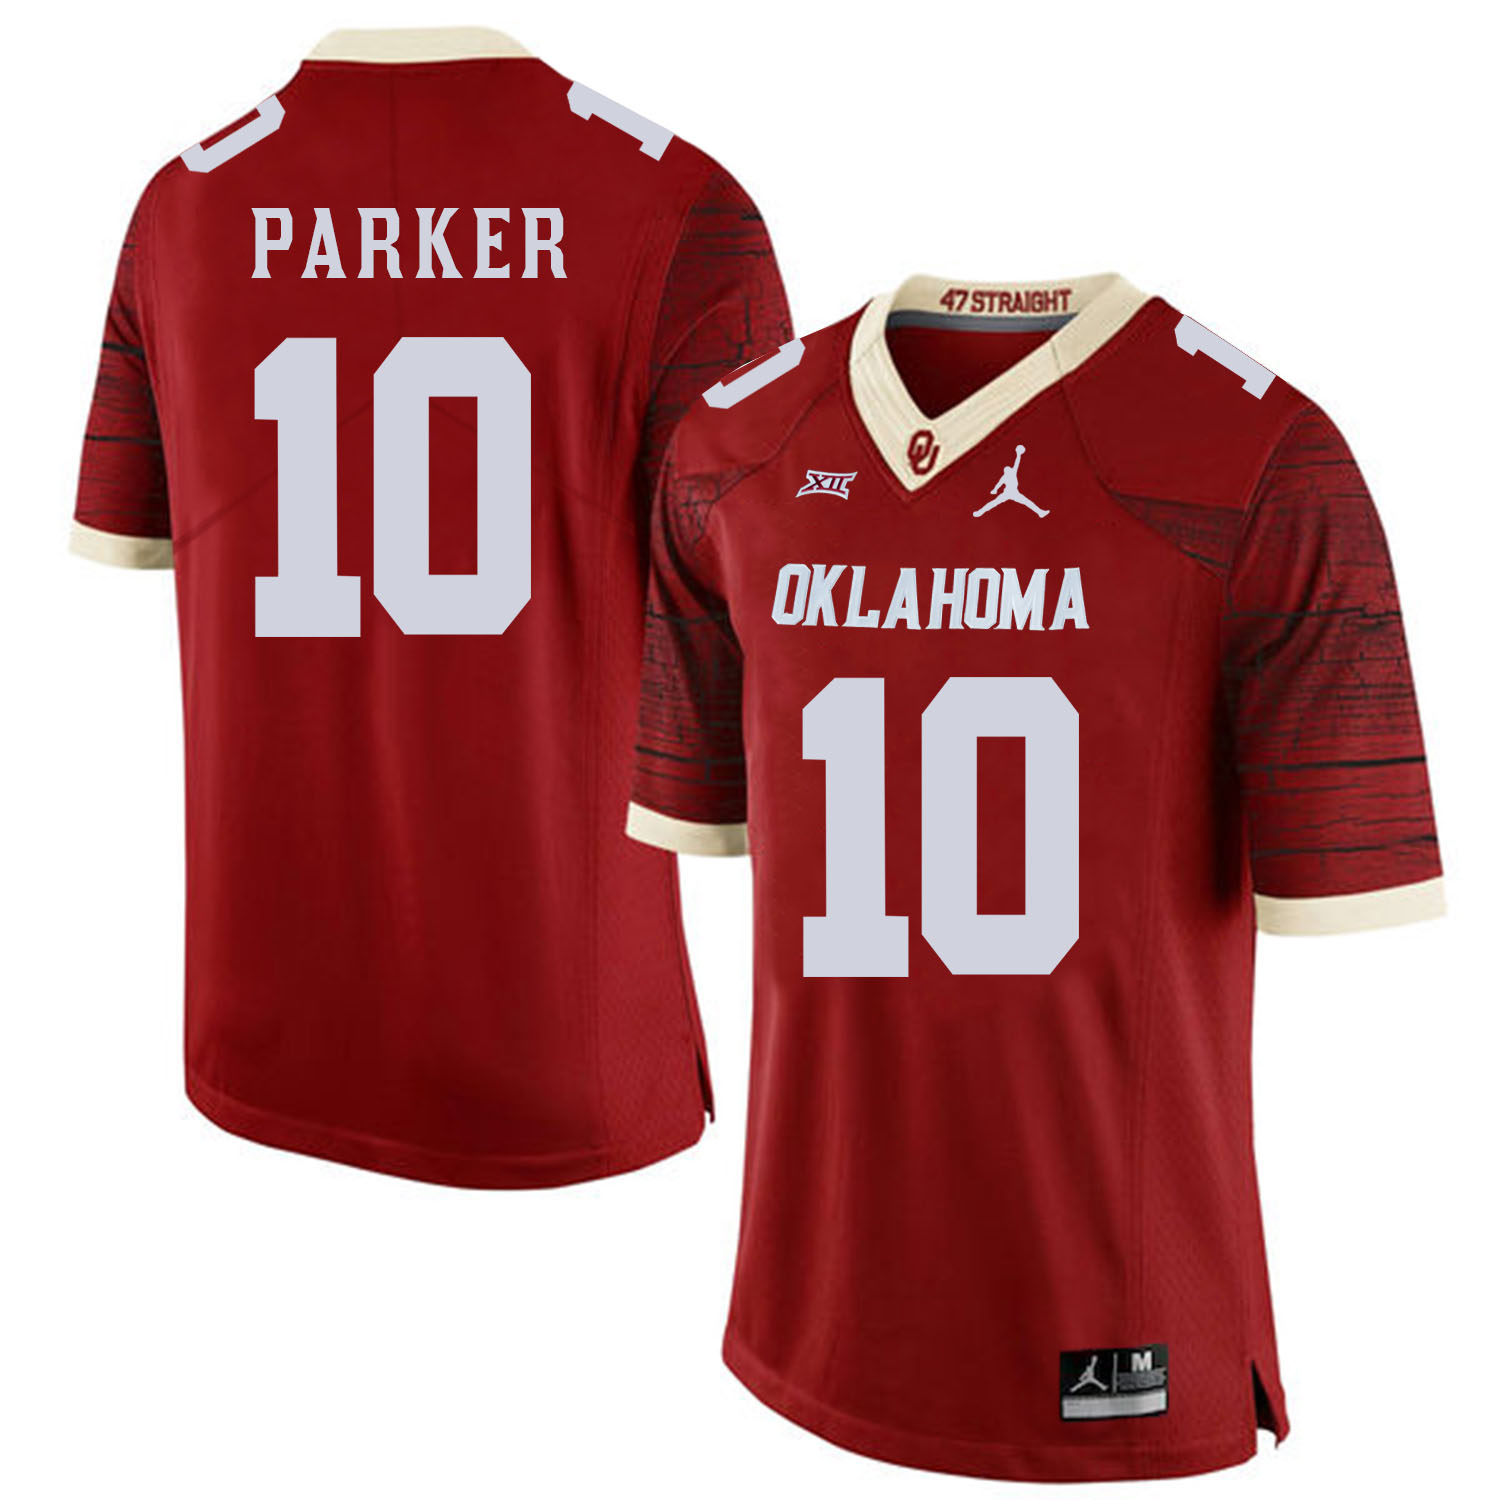 Oklahoma Sooners 10 Steven Parker Red 47 Game Winning Streak College Football Jersey - Click Image to Close